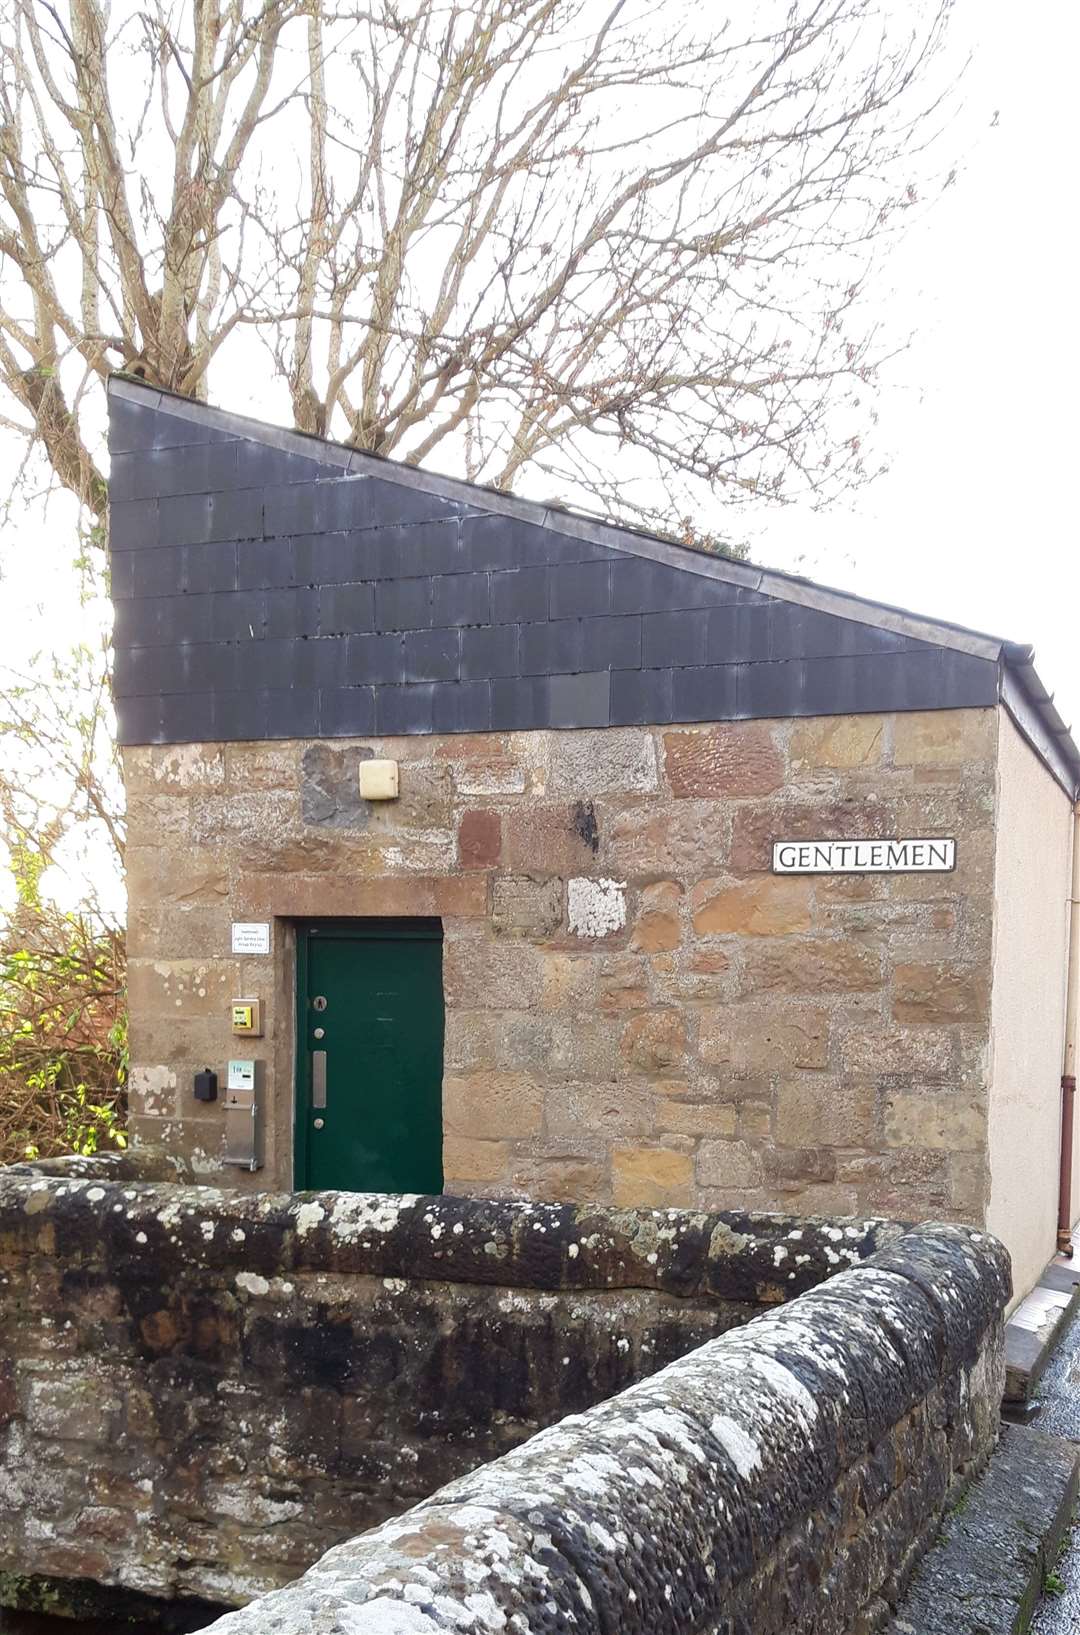 The dilapidated state of the public toilets do not give a good impression of Dornoch, according to community councillors.